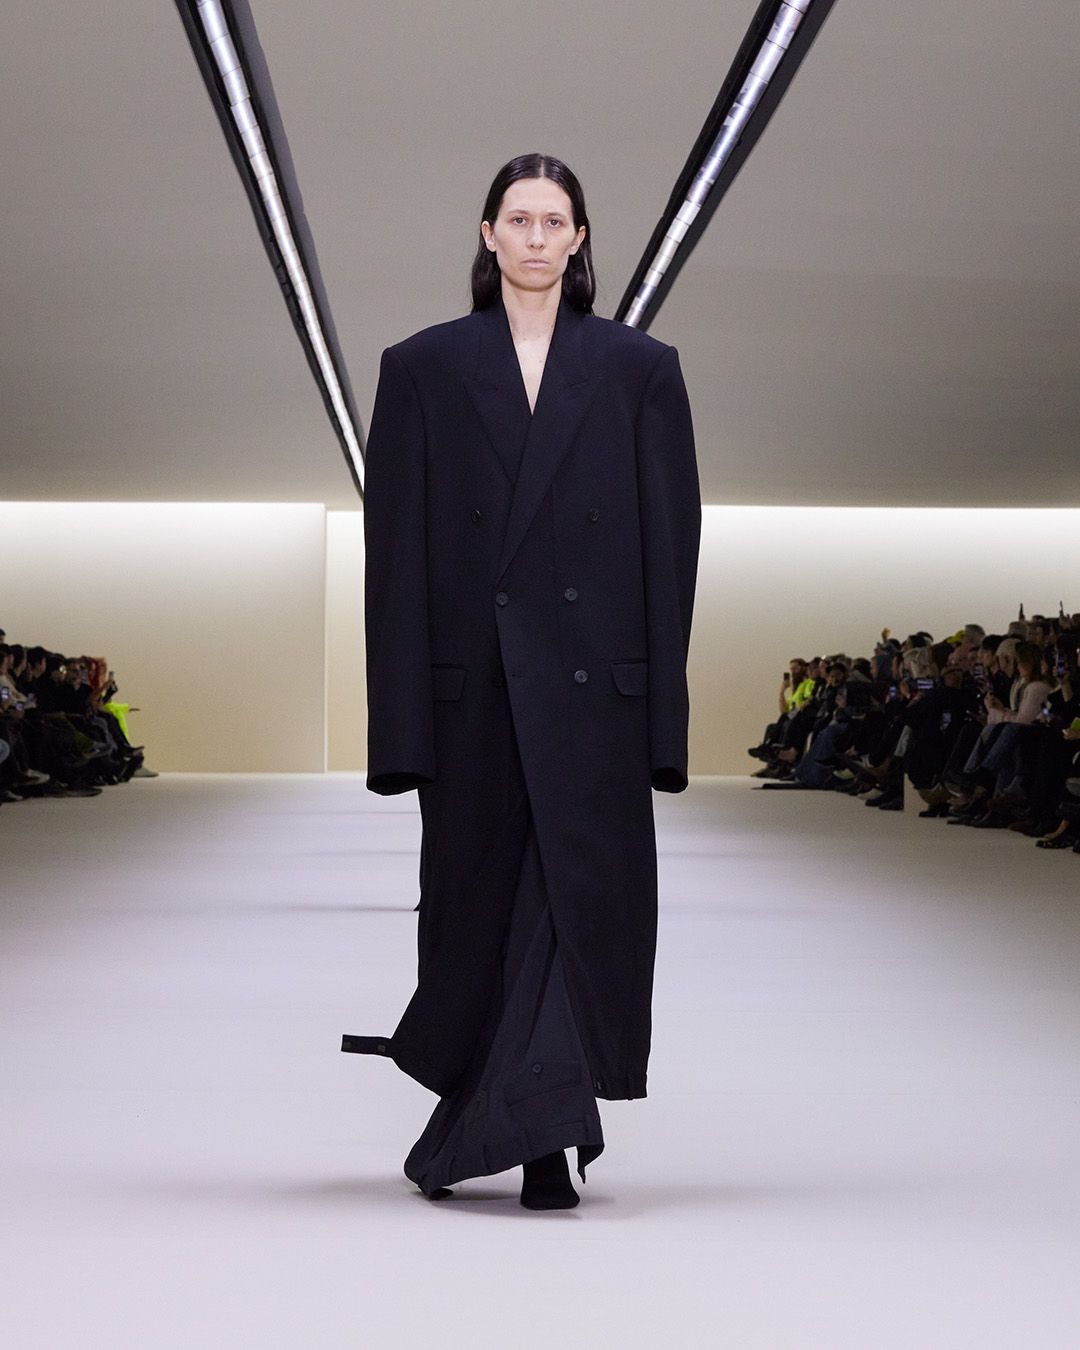 Balenciaga's Demna Is Bridging The Past and Future Through Couture